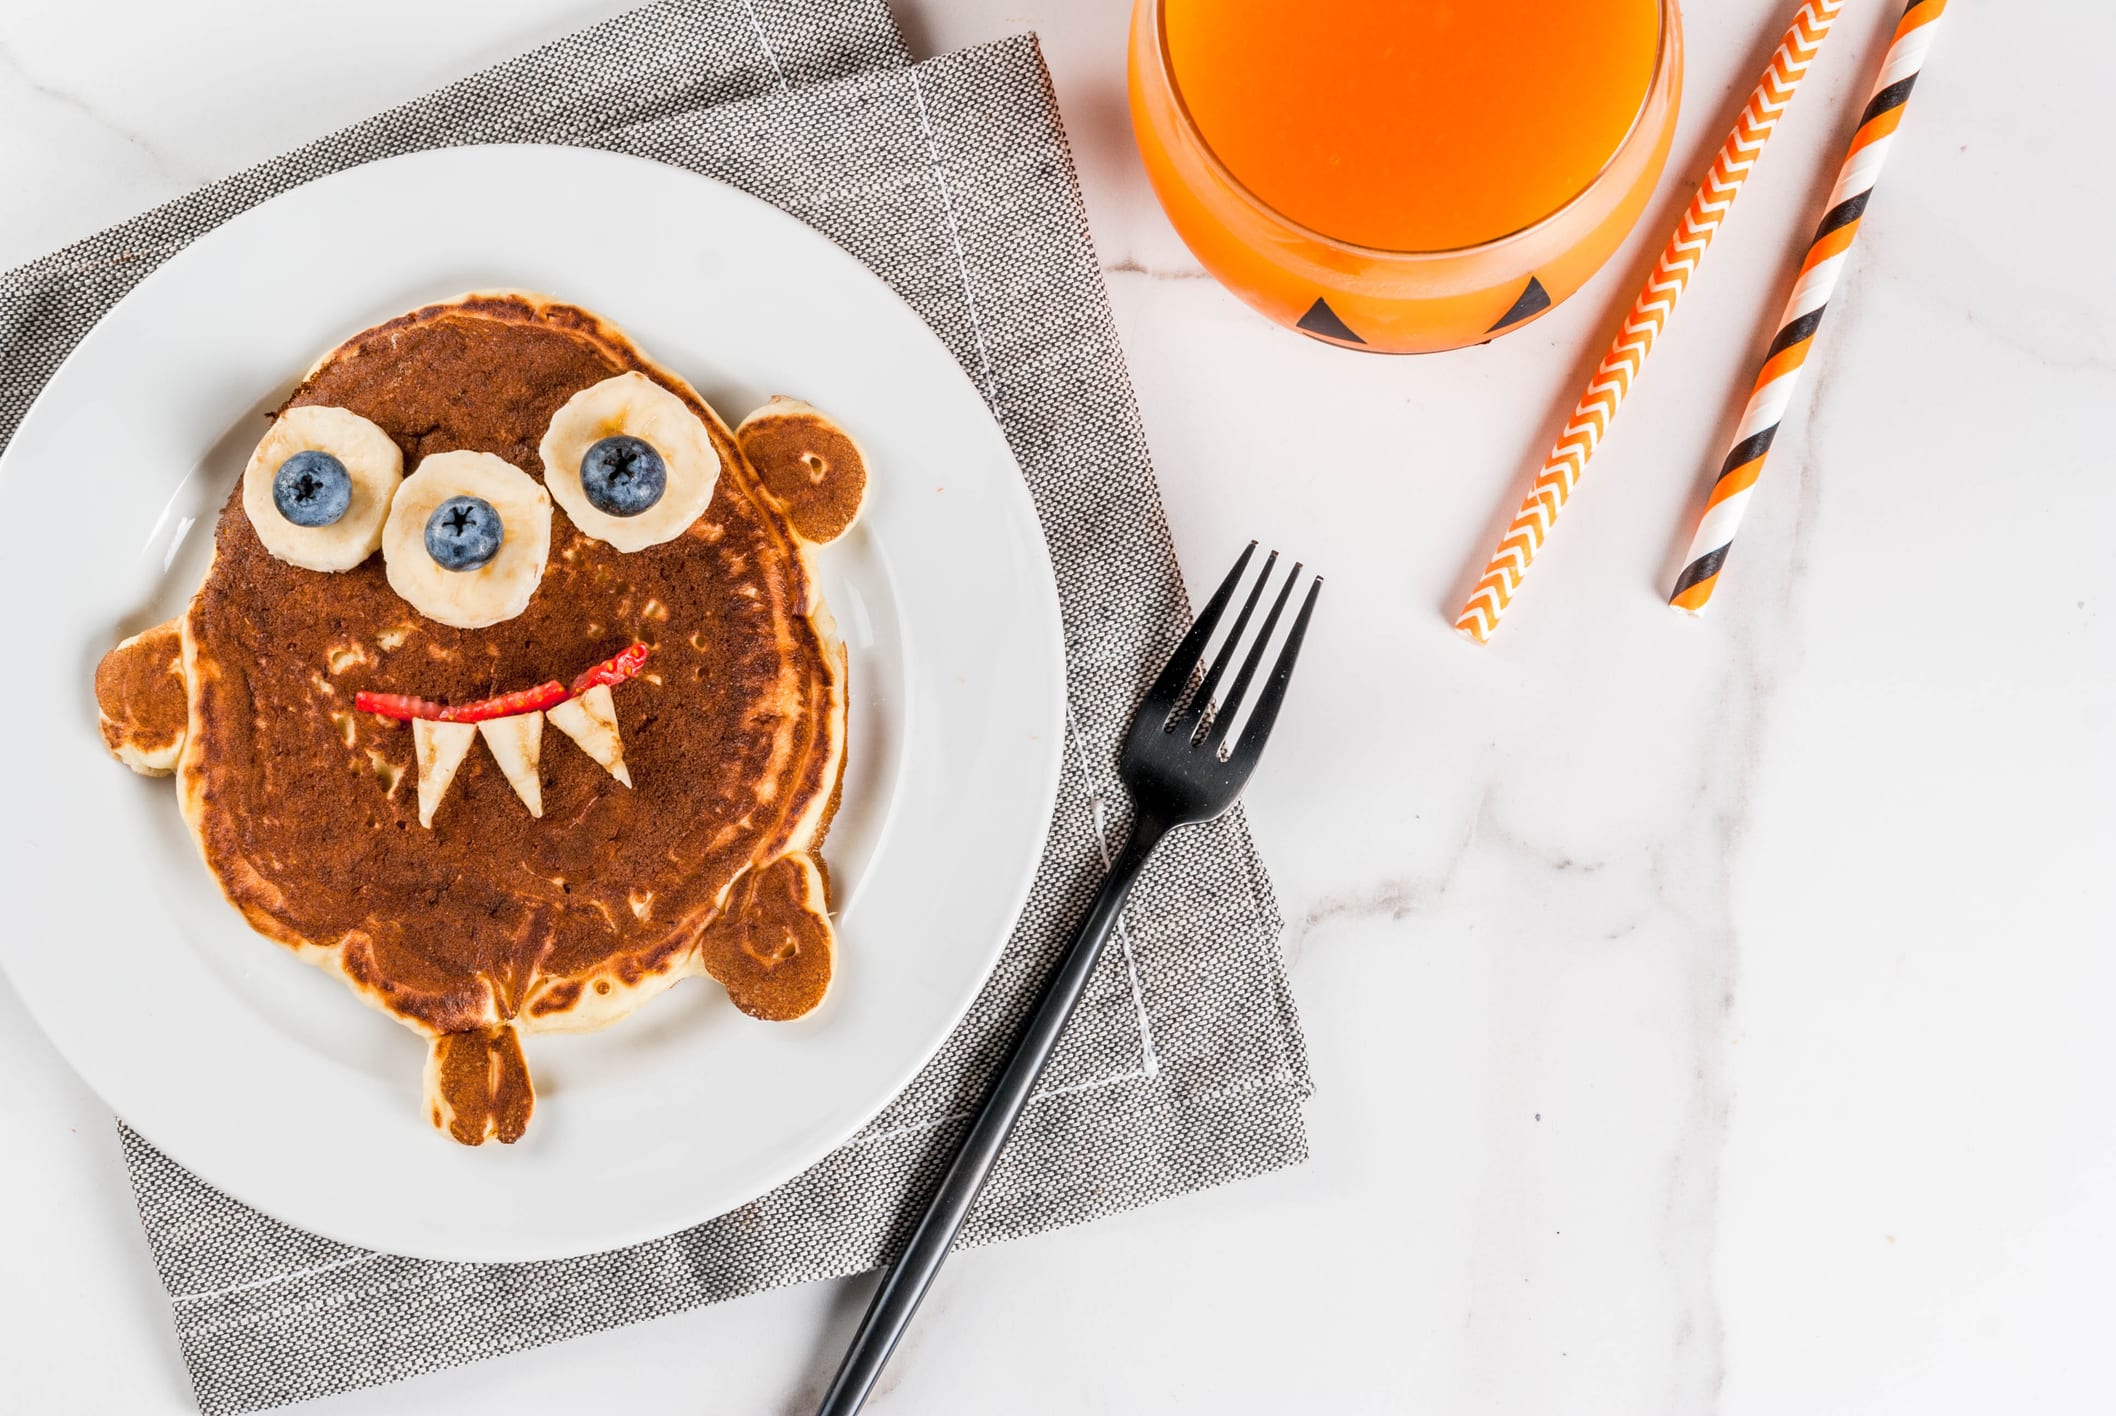 Funny food for Halloween. Kids breakfast pancake decorated like creepy monster, with banana, berries, with pumpkin smoothie juice, white table copy space top view